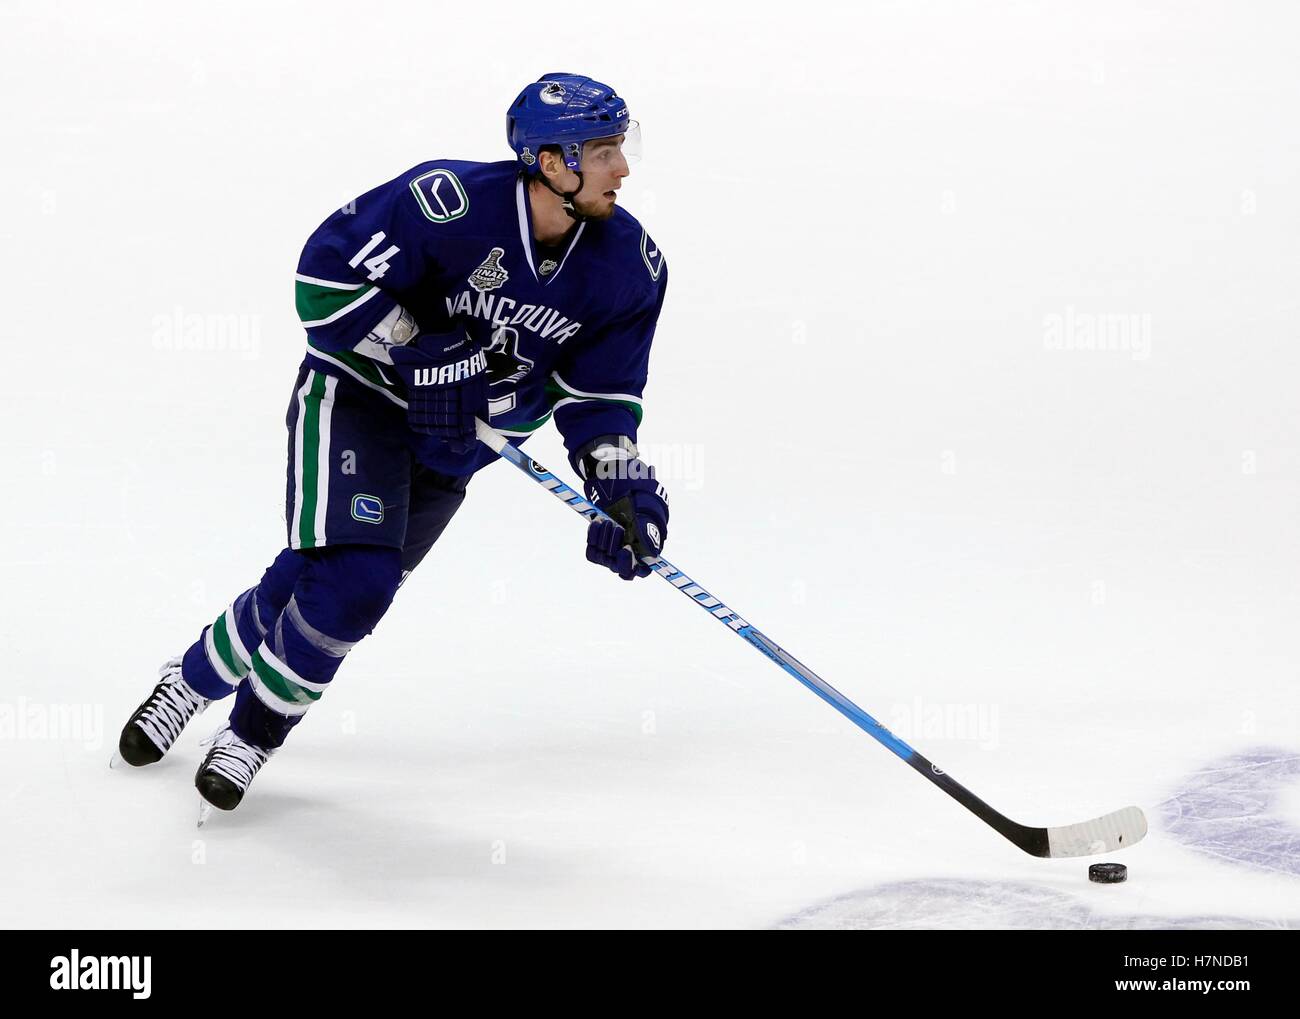 Love him or hate him, the Vancouver Canucks' Alex Burrows always put his  team first